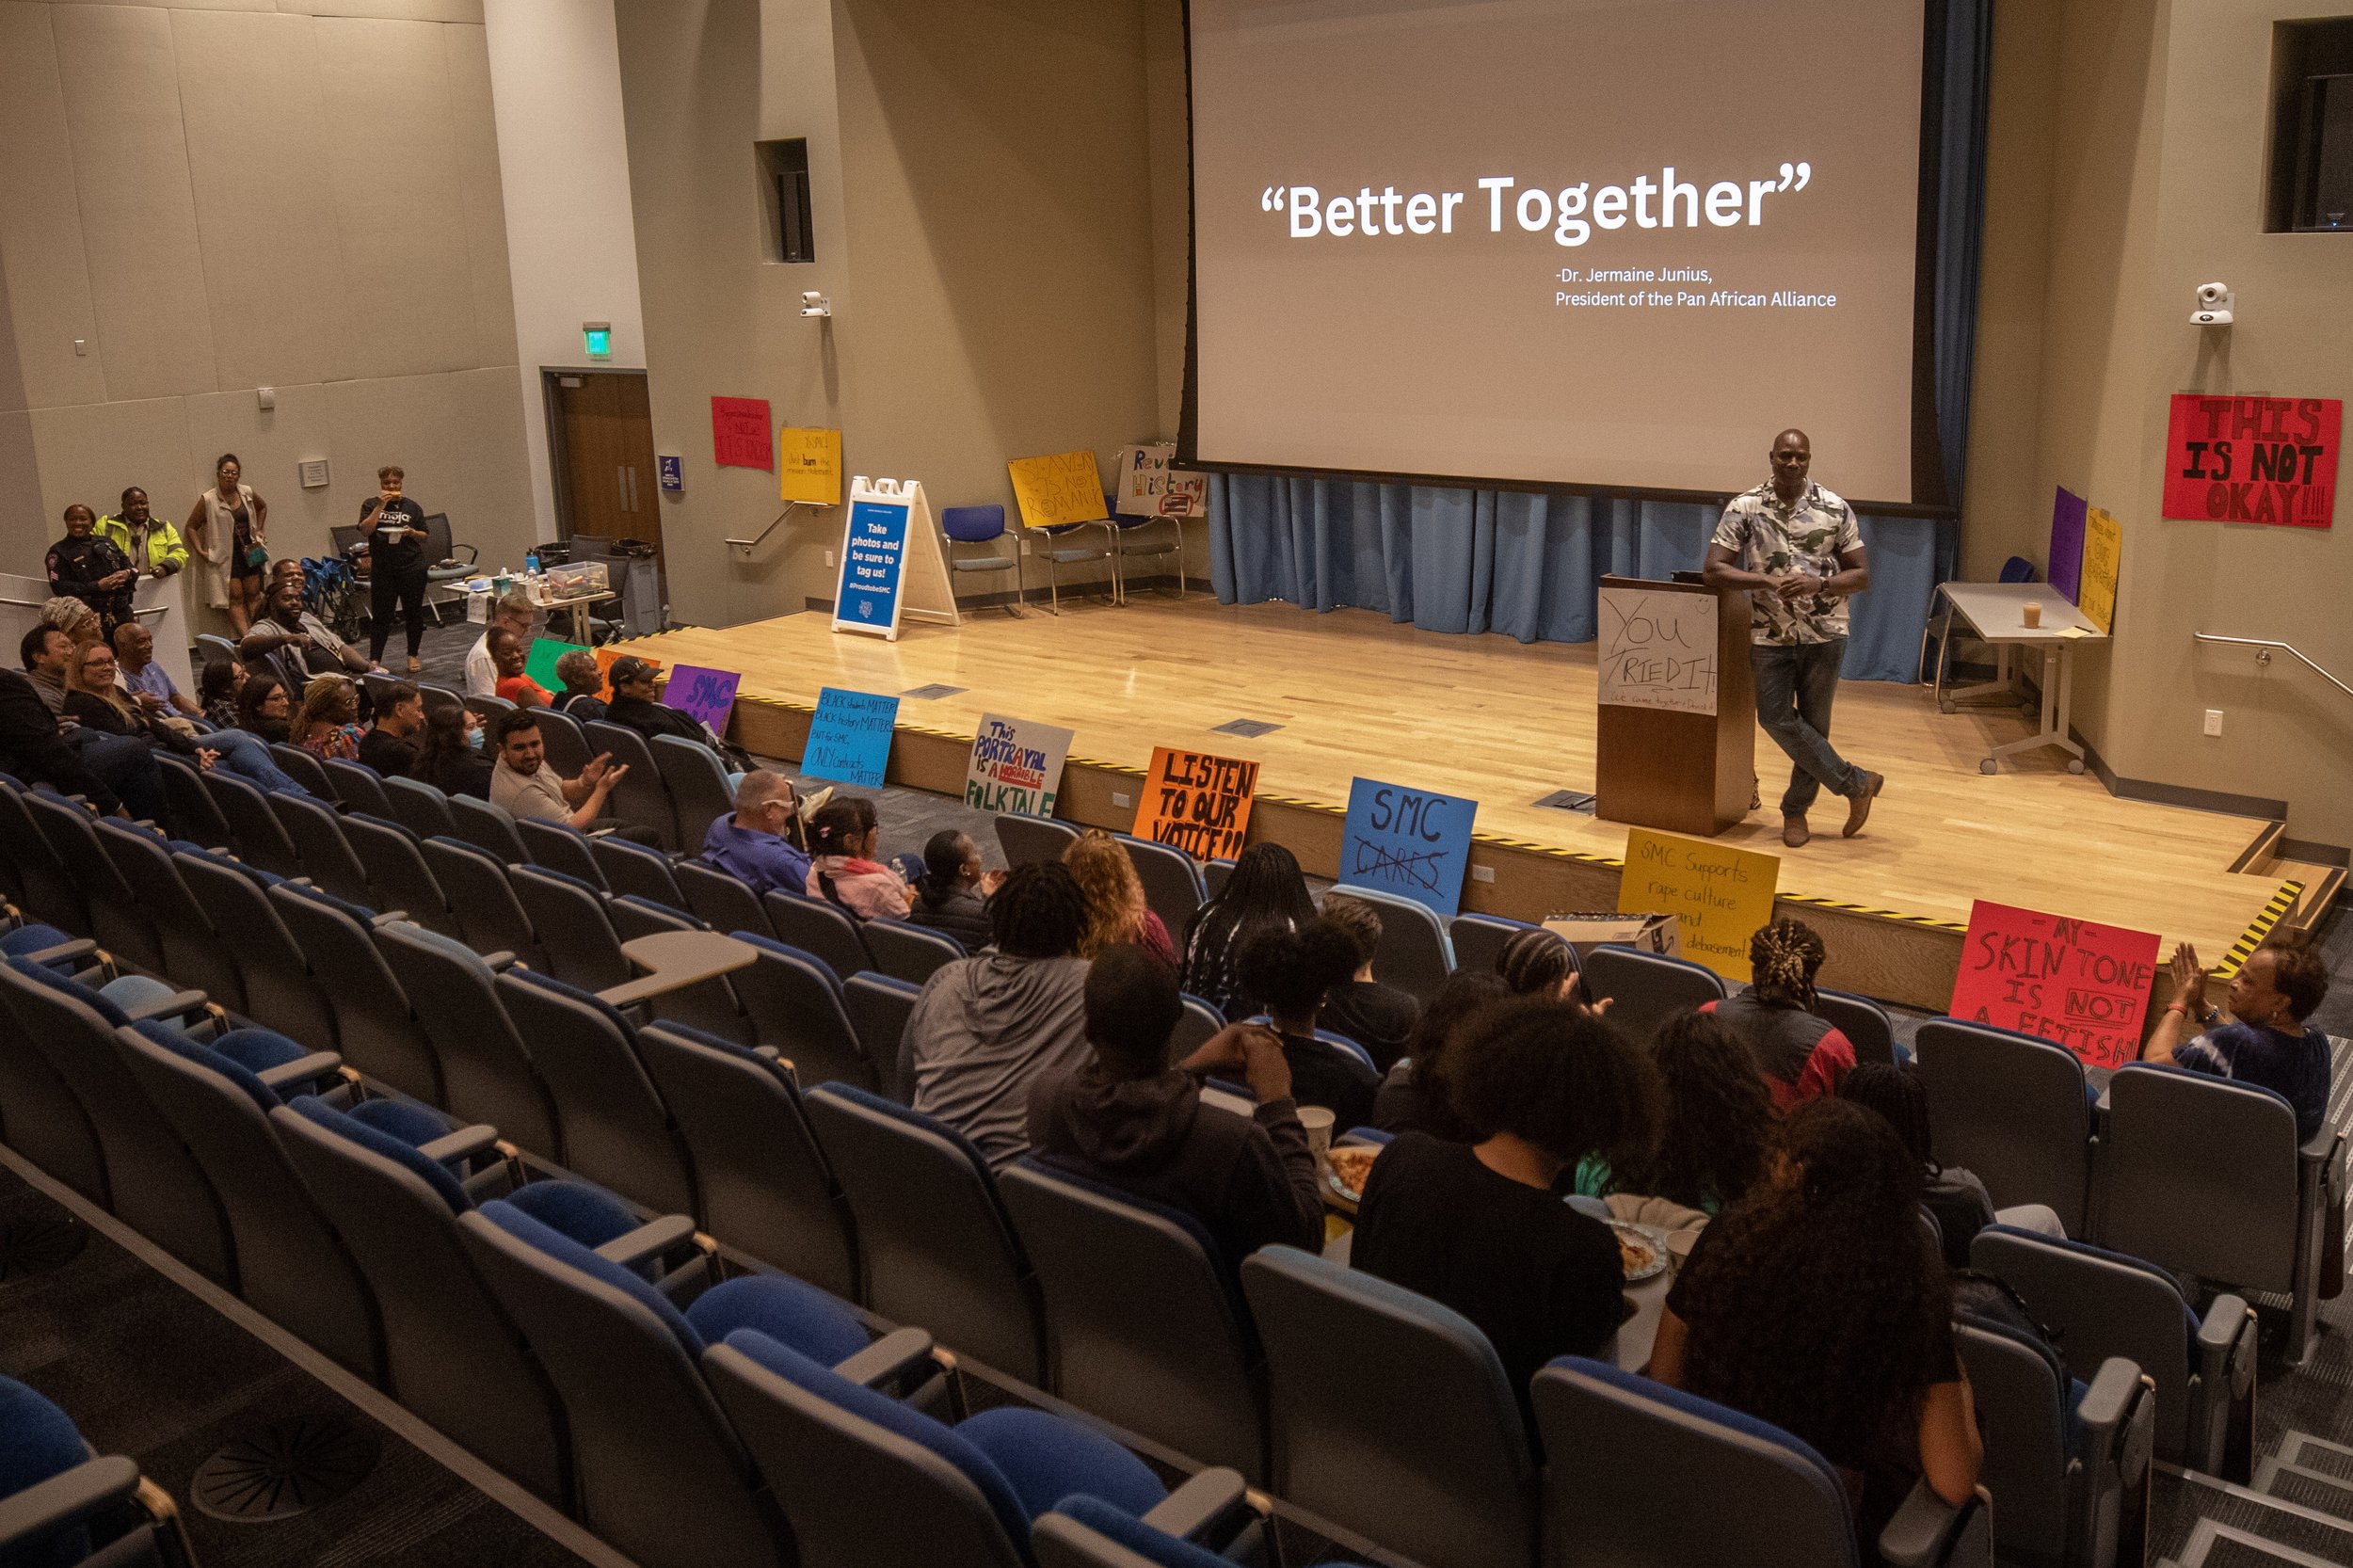  Dr. Jermaine Junius, president of the Pan African Alliance, at the community gathering in lieu of a protest against the play "By The River Rivanna" in the Student Services Orientation Hall on the main campus at Santa Monica College in Santa Monica, 